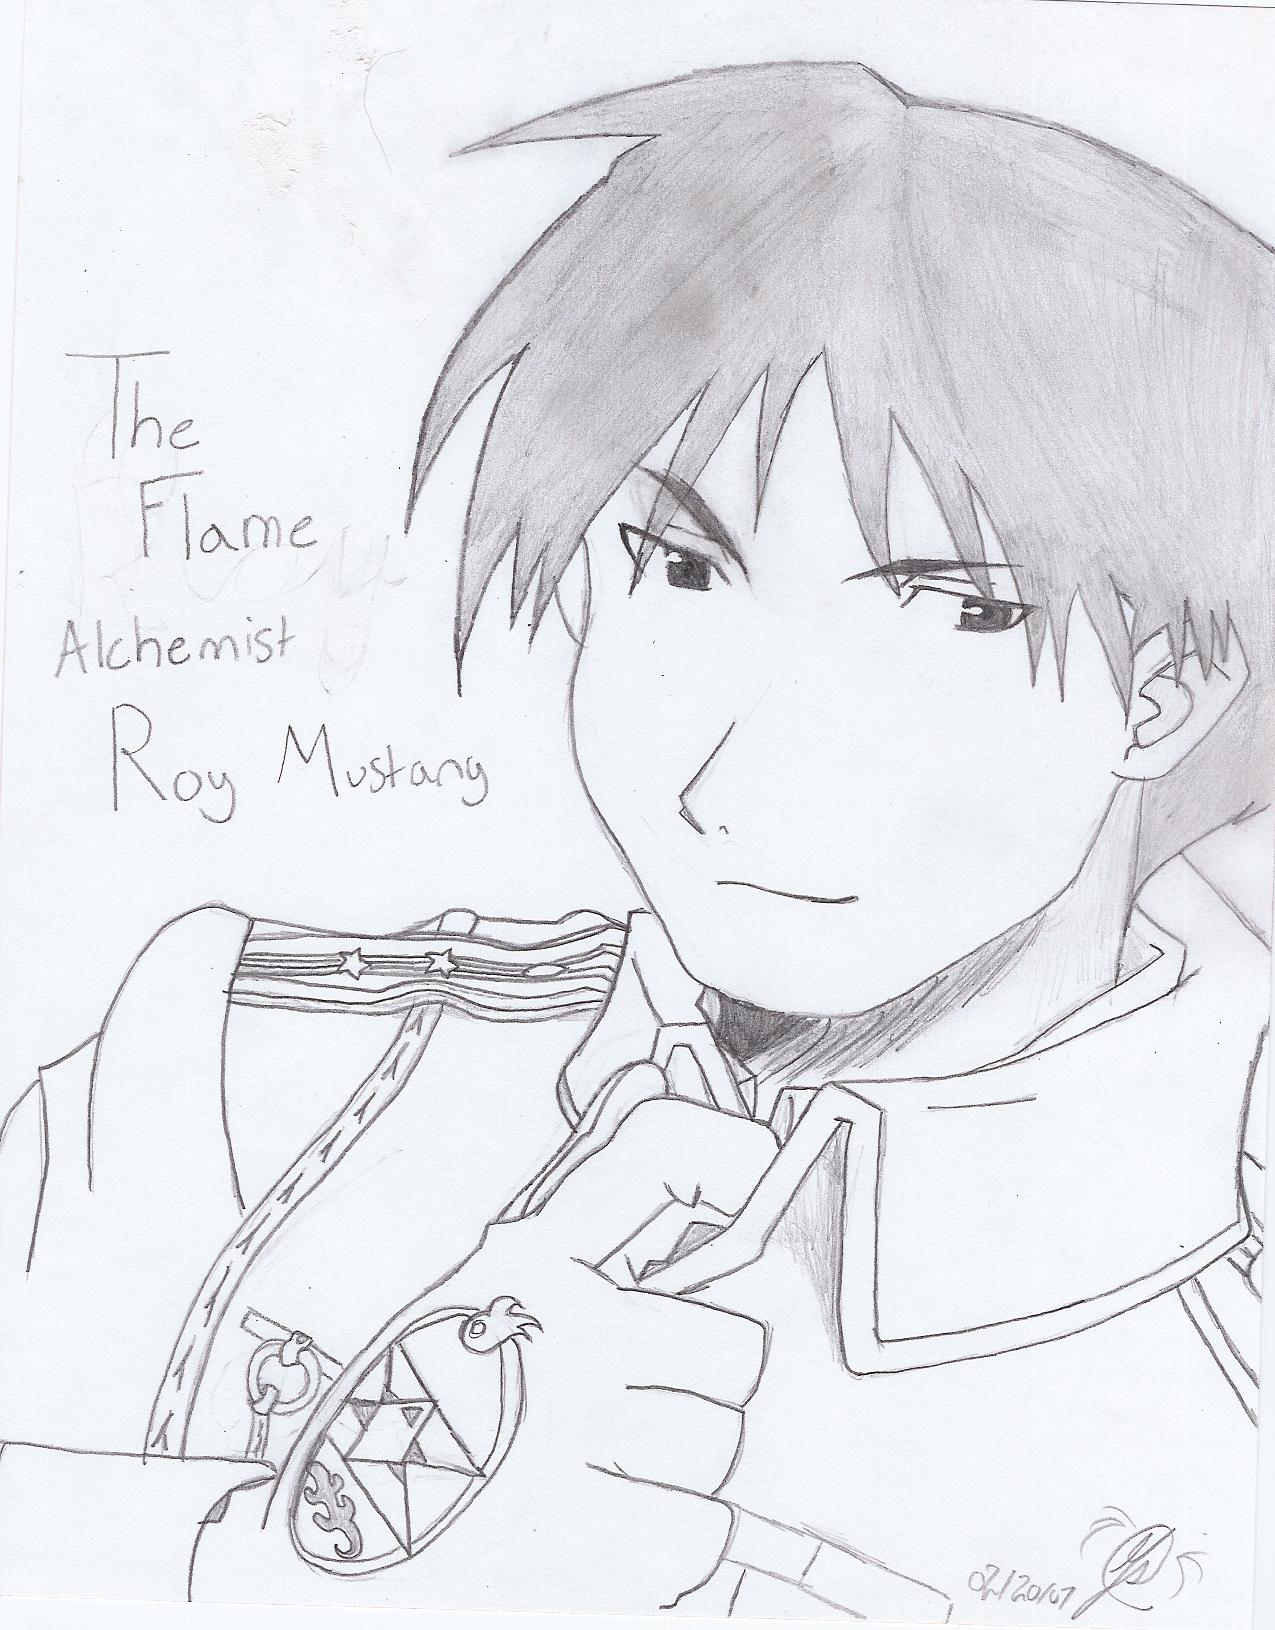 The Flame Alchemist by Jr_the_Red_Dragon